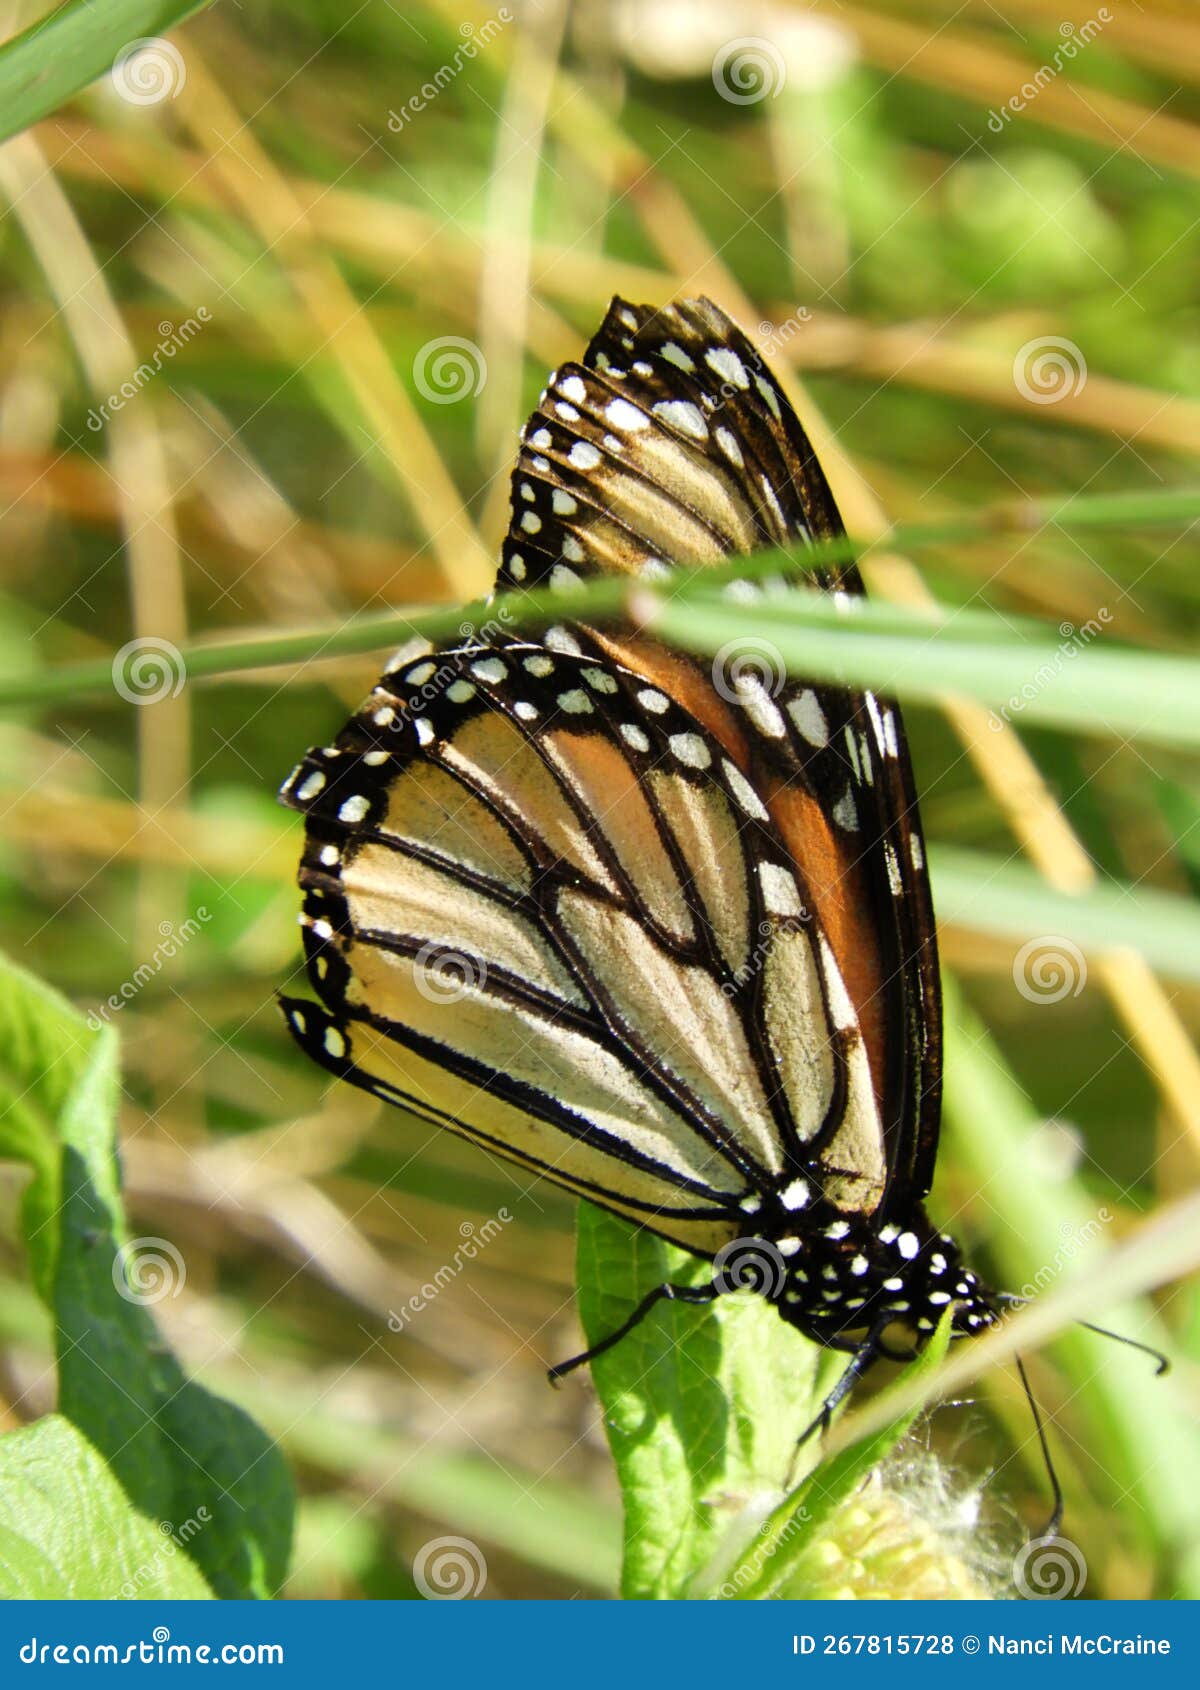 monarch butterfly feeds in late summer before migration